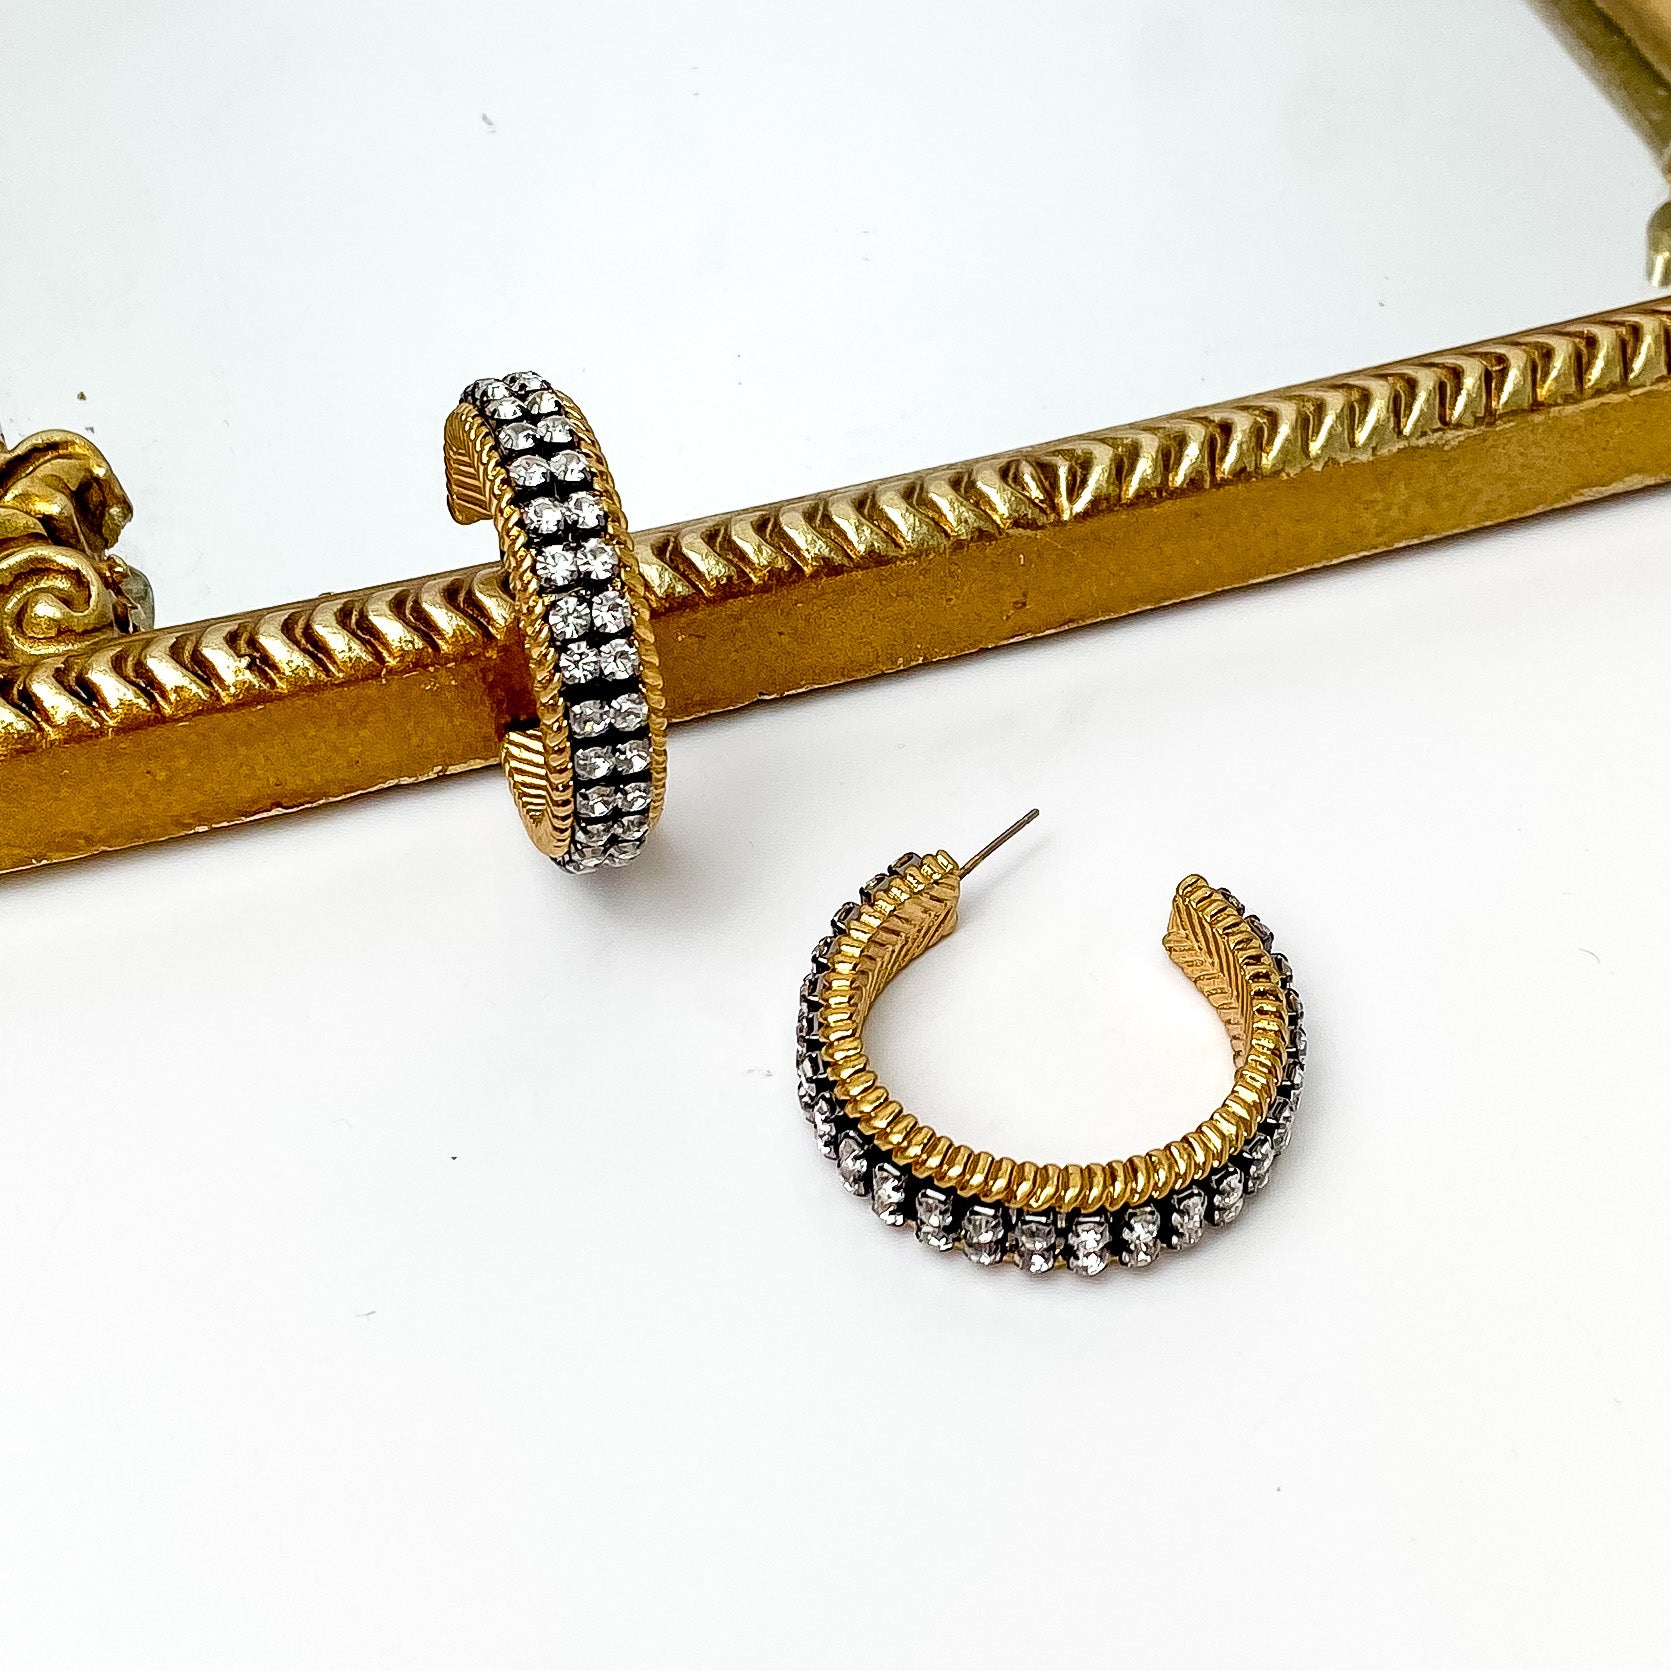 Clear Crystal Inlay and Gold Tone Hoop Earrings with Black Setting - Giddy Up Glamour Boutique